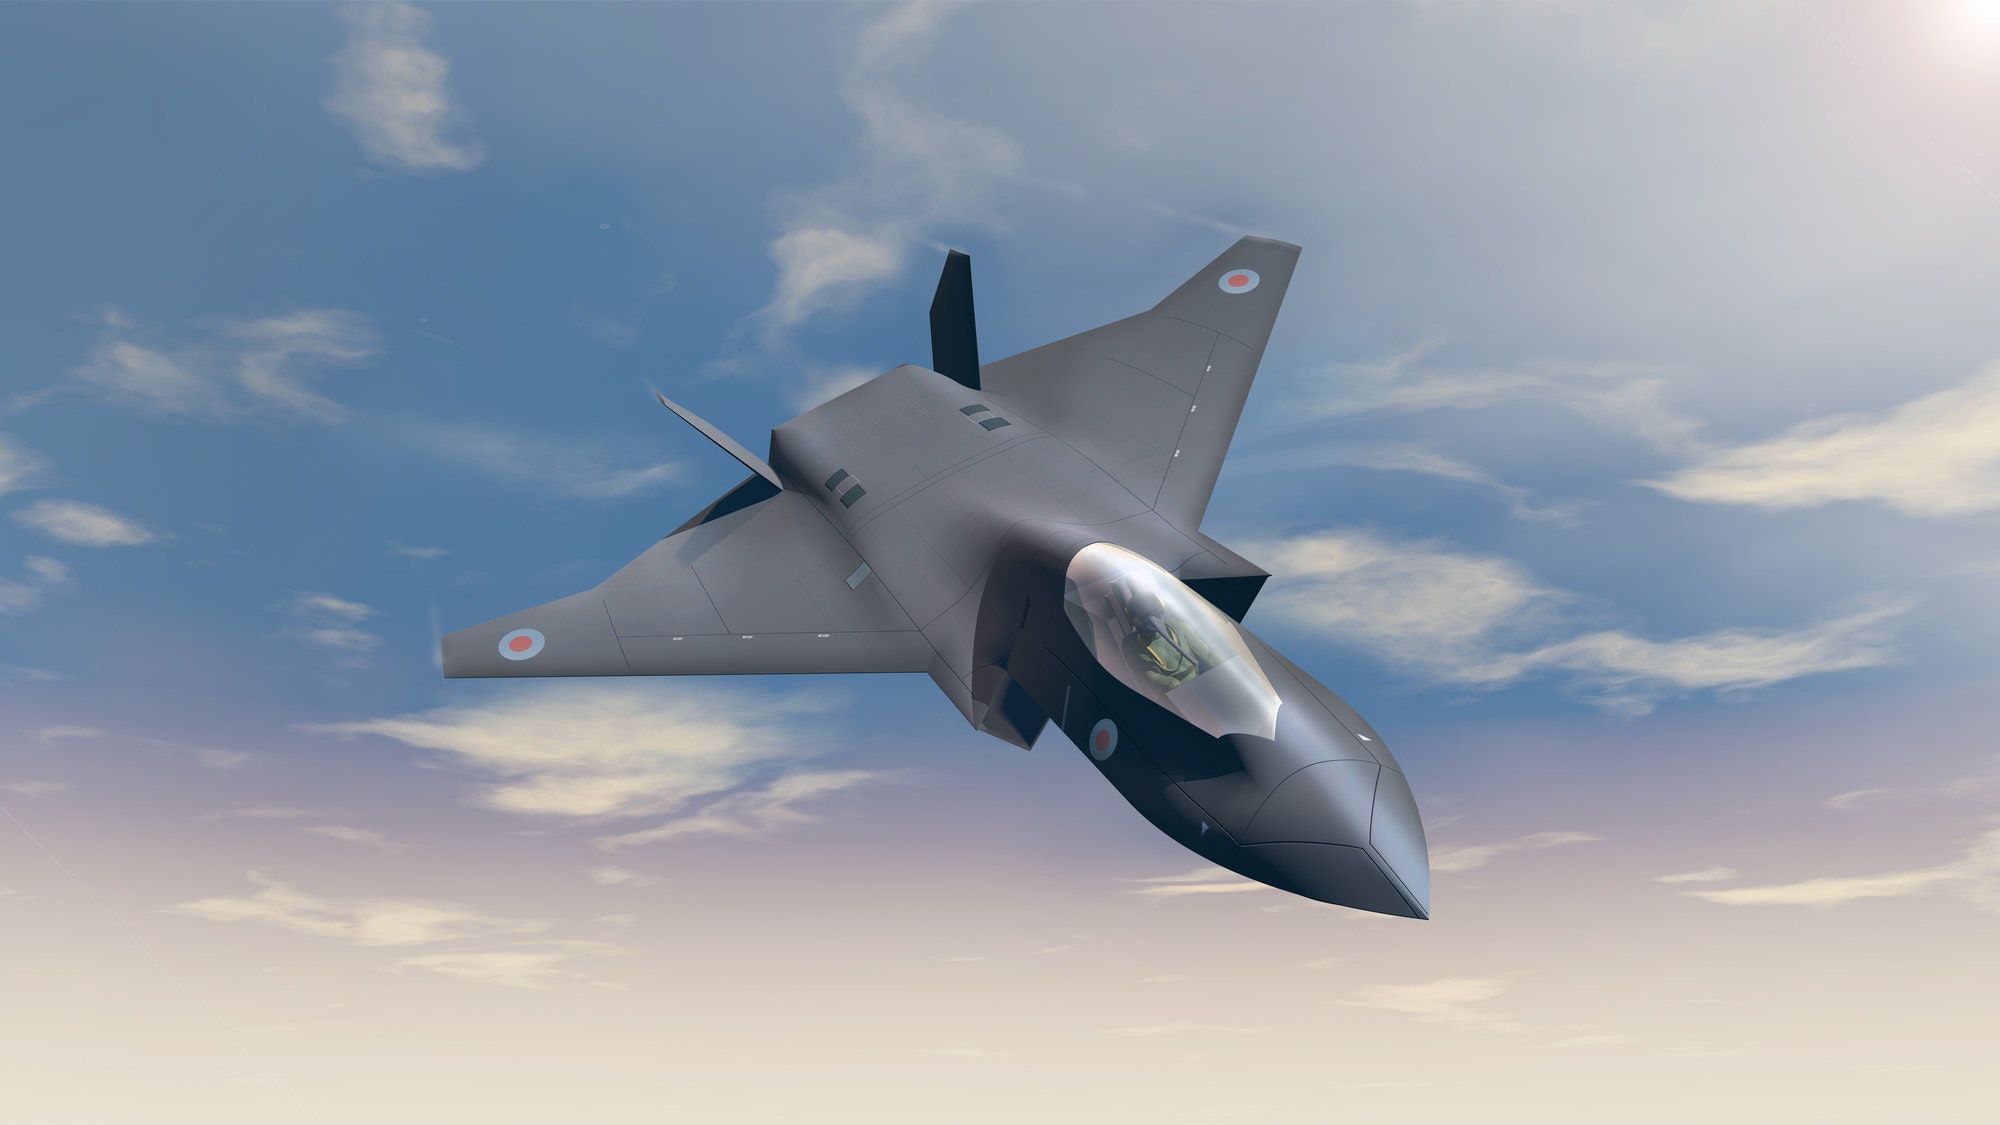 Italy partners with the UK on Tempest fighter project